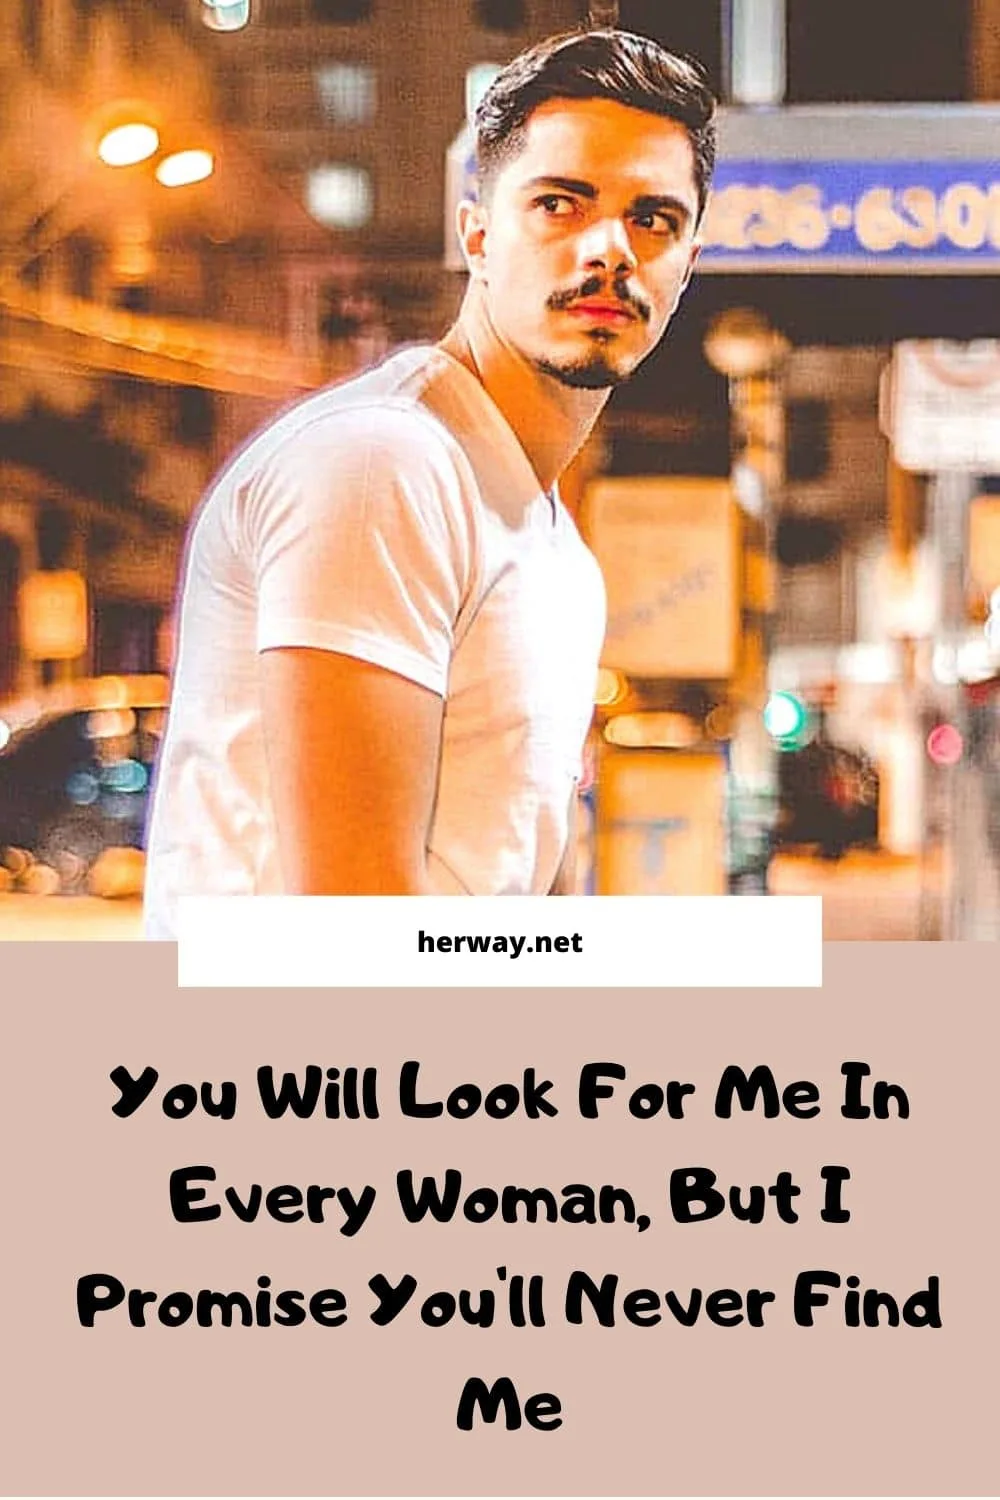 You Will Look For Me In Every Woman, But I Promise You'll Never Find Me